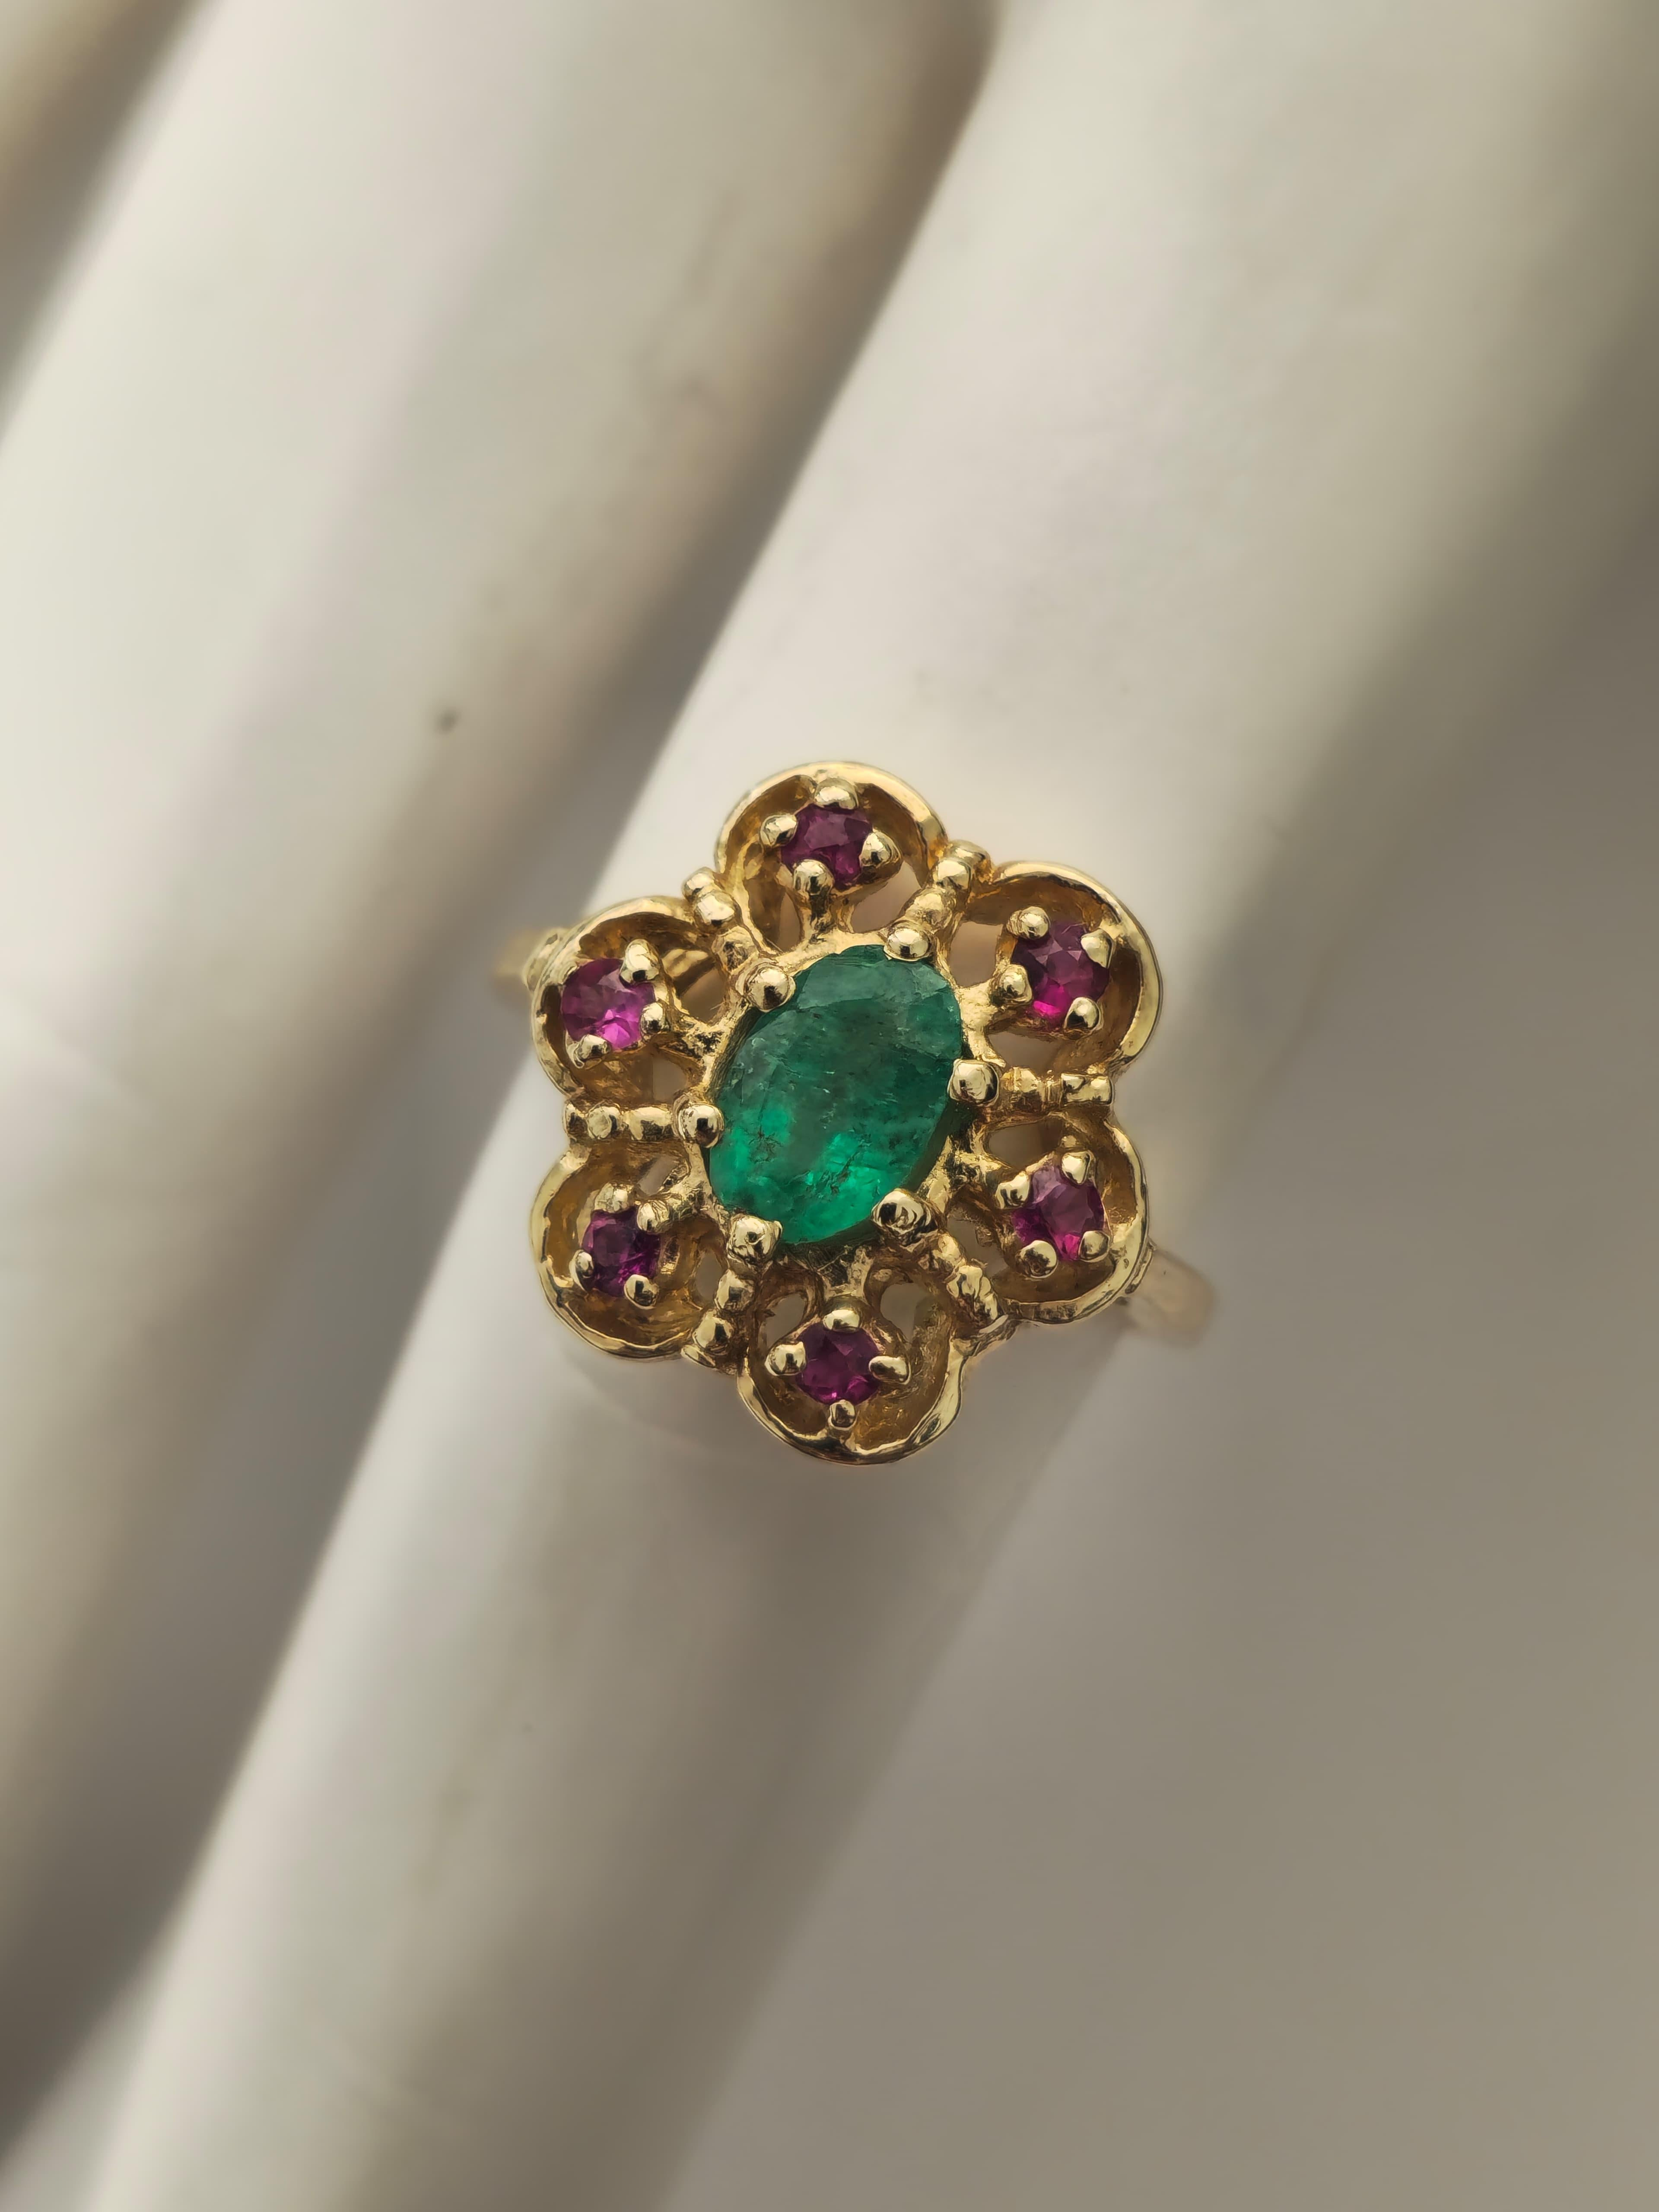 Explore the allure of this 14kt gold ring showcasing a captivating 0.60ct emerald and a vibrant 0.40ct ruby, combining for a total of 1ct. The ring weighs 3.6 grams and is sized for US 5.25, with resizing options available for the perfect fit. This